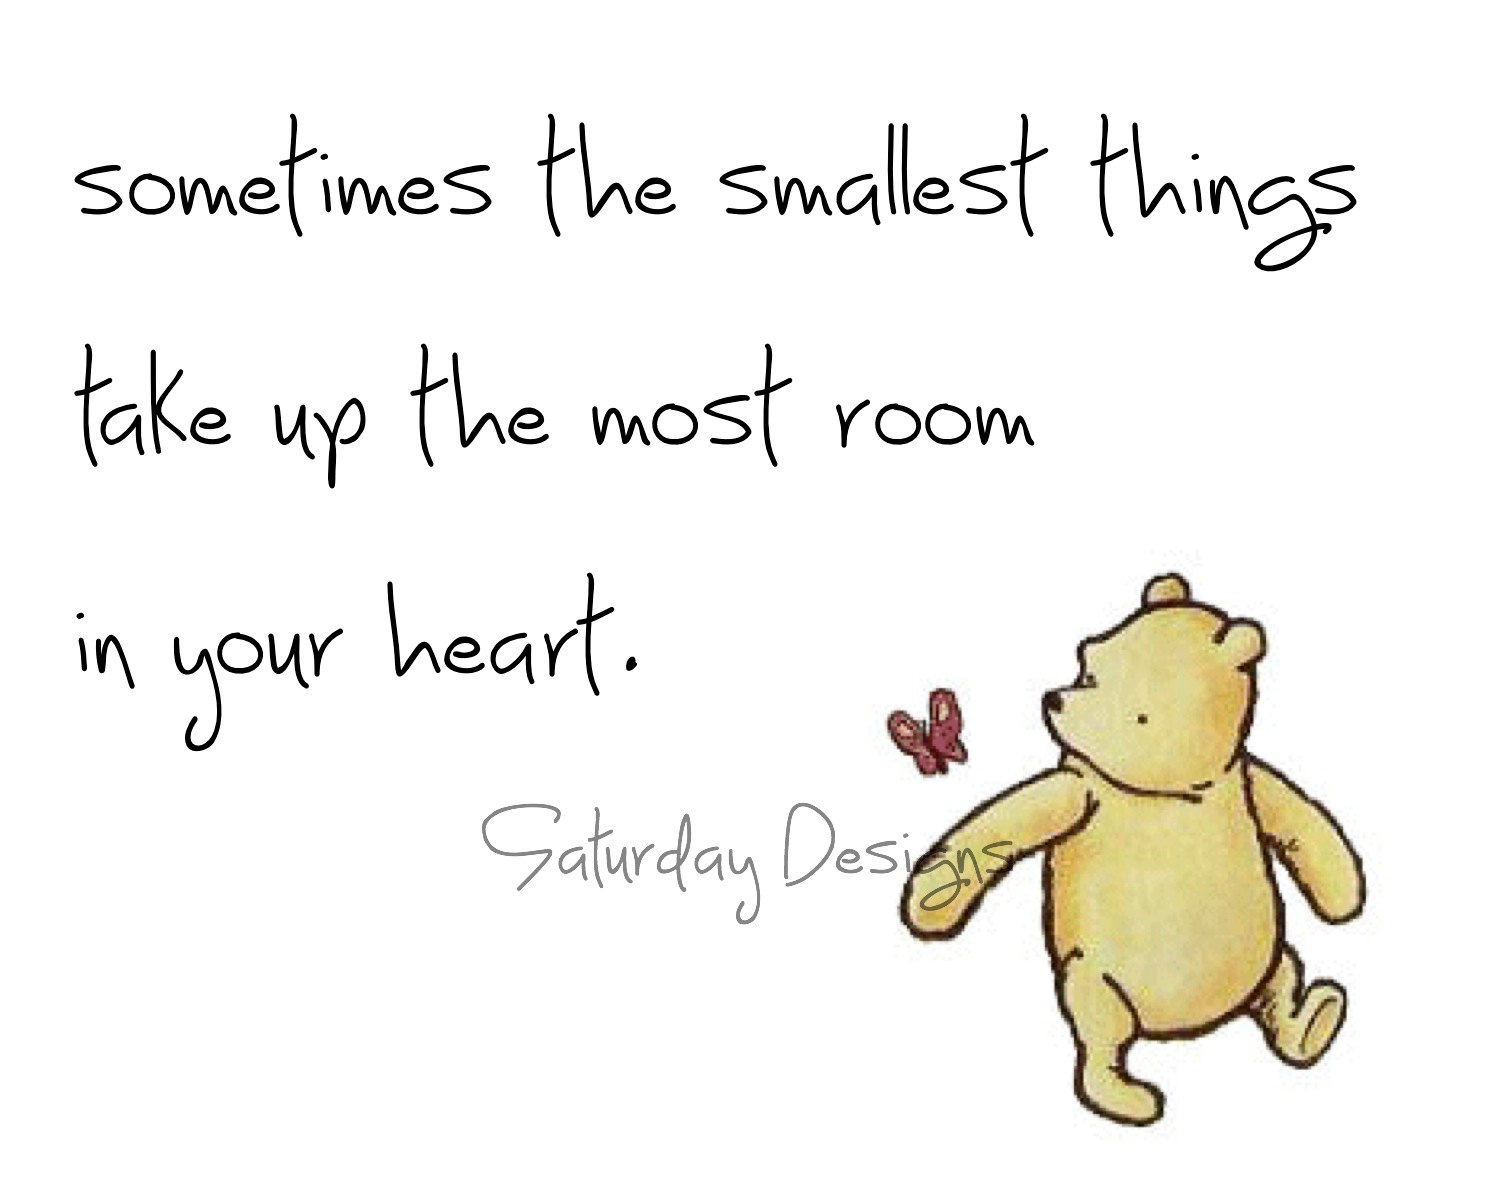 Friendship Quote From Winnie The Pooh A wel ing hearth my favourite quote from book or